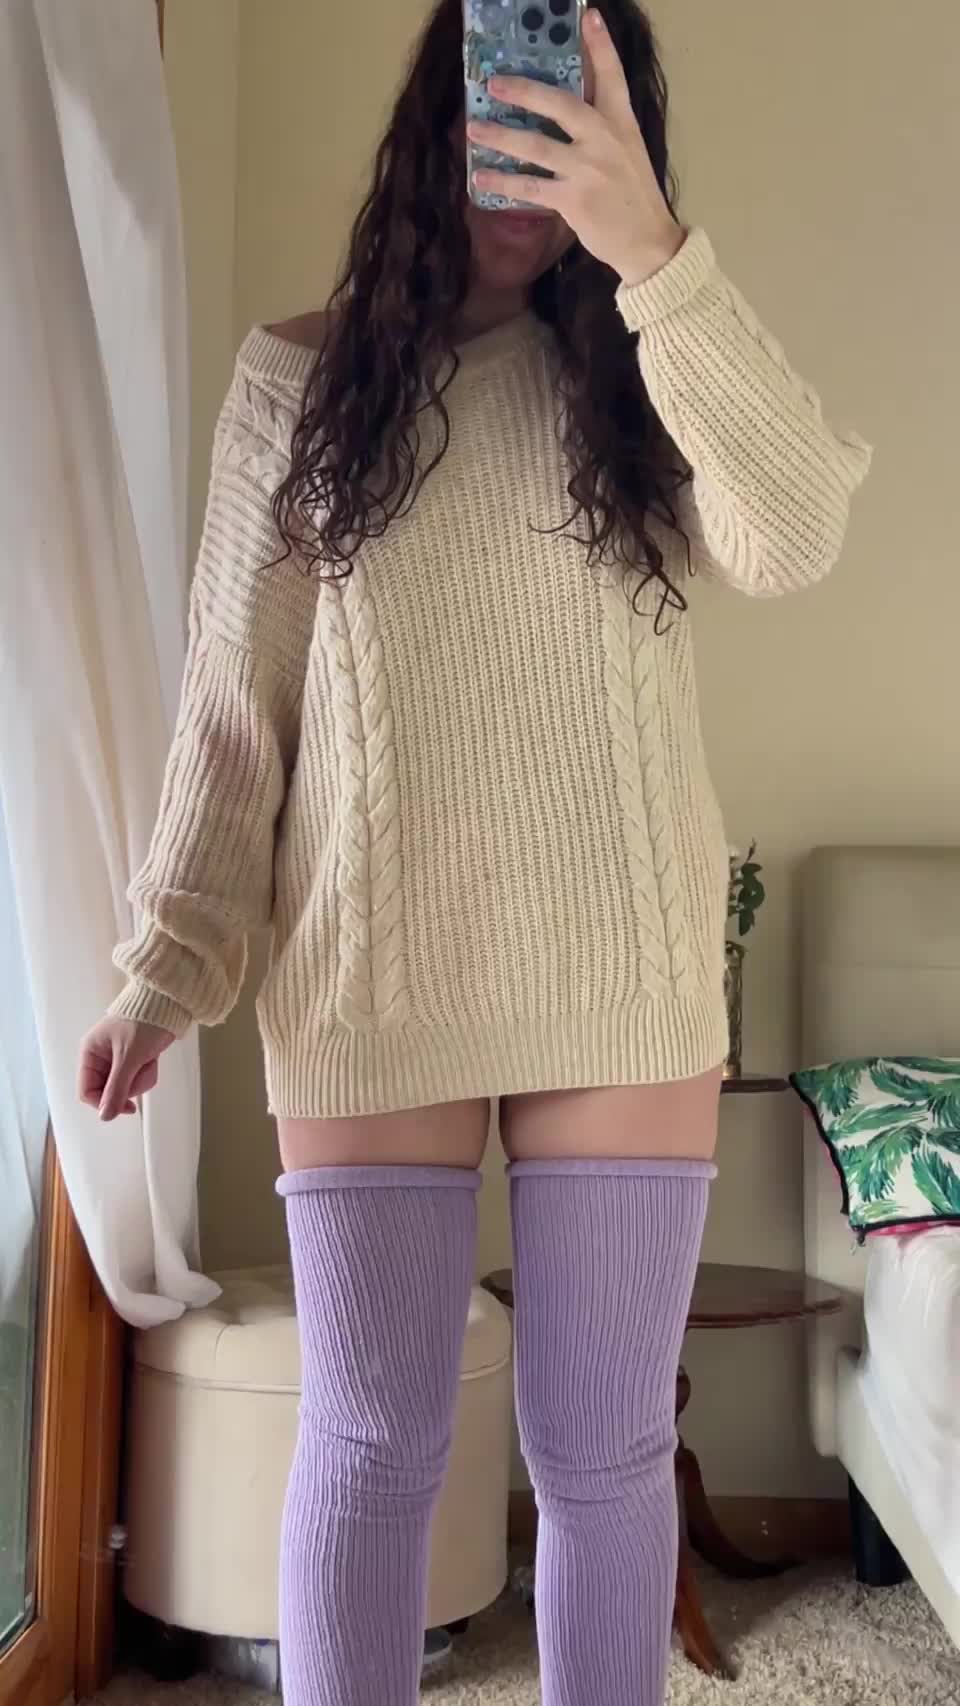 big sweater with nothing underneath for easy access : video clip